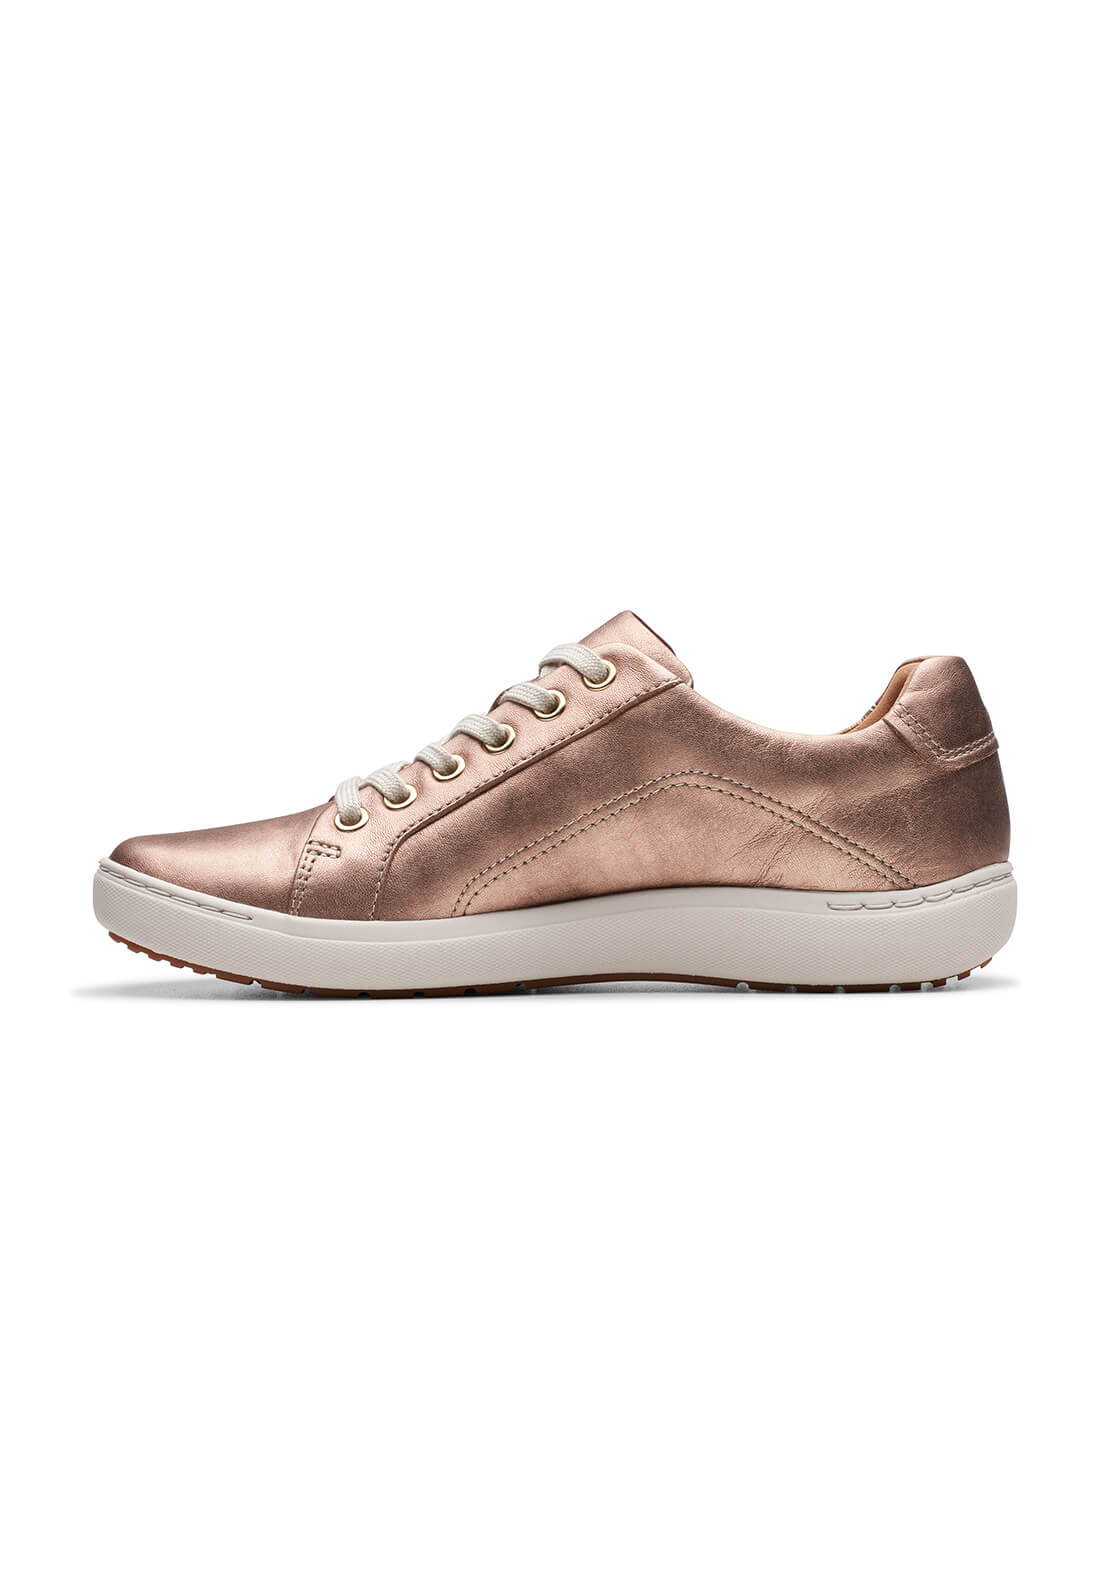 Clarks Nalle Lace Zip Trainer - Rose Gold 2 Shaws Department Stores